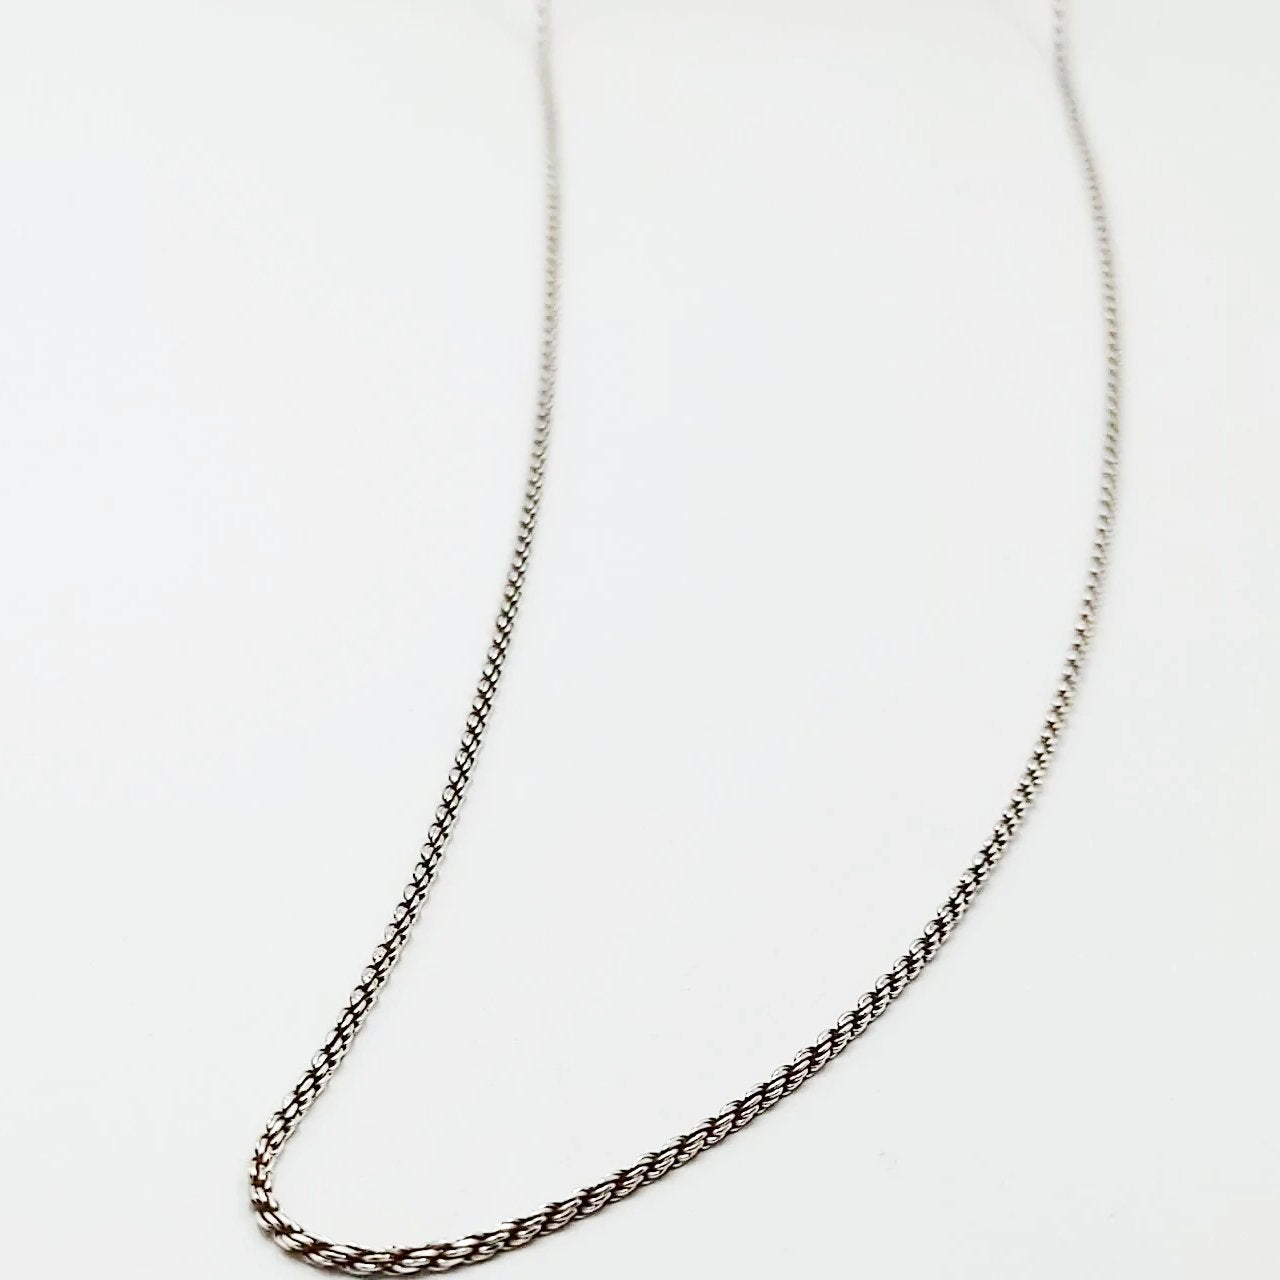 Silver Rope Chain 3' 36" Long Necklace Sterling 925